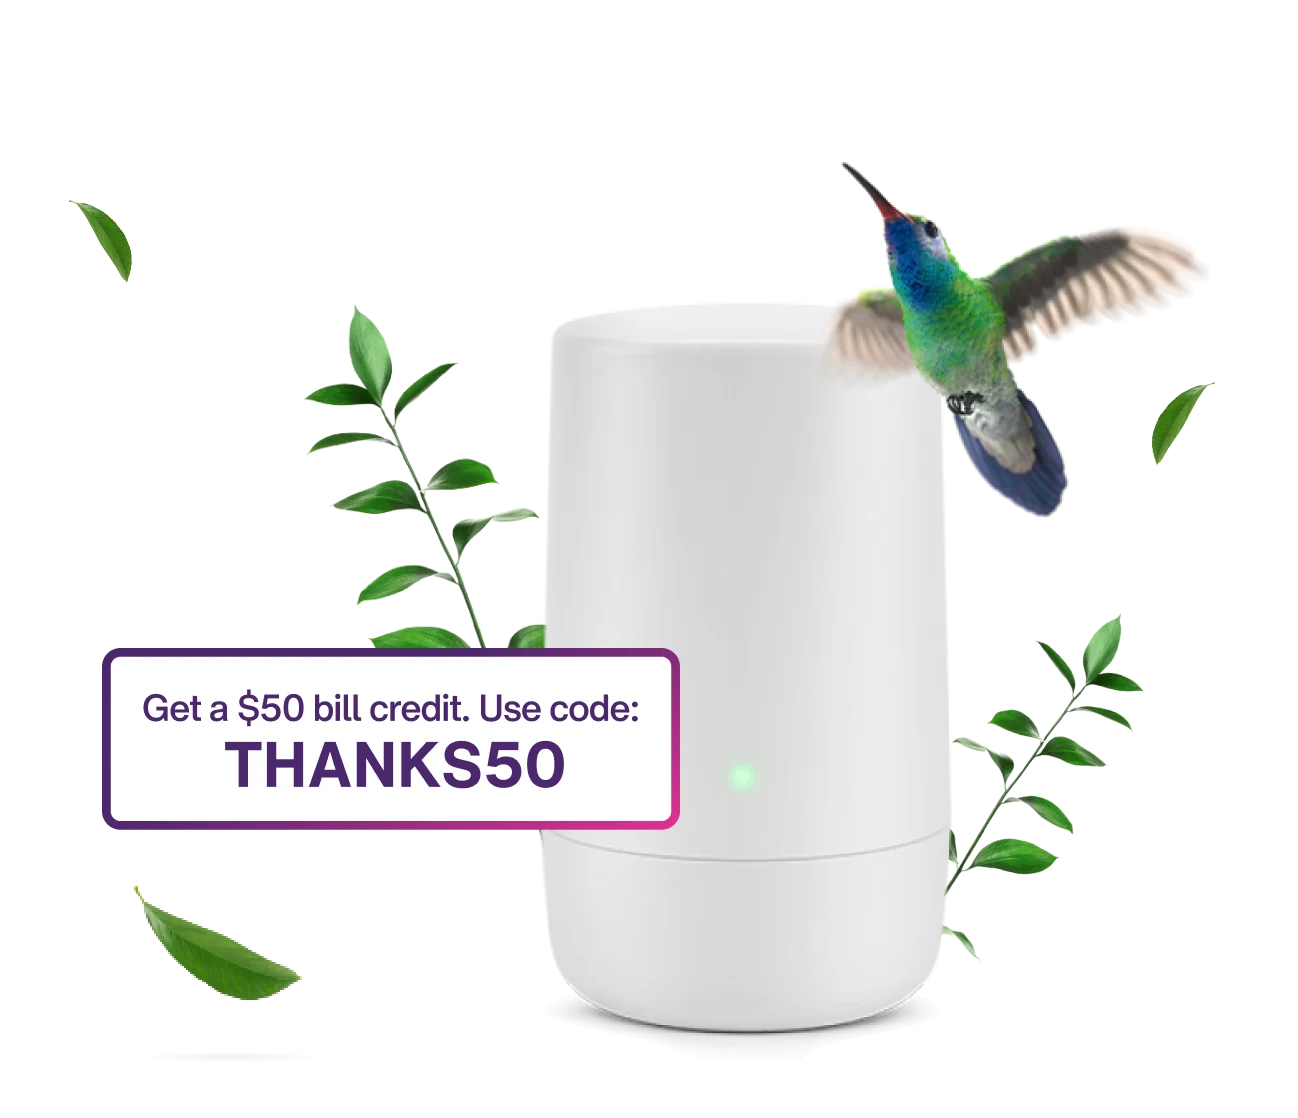 A colourful hummingbird hovers in front of a TELUS PureFibre modem, which is surrounded by falling leaves.